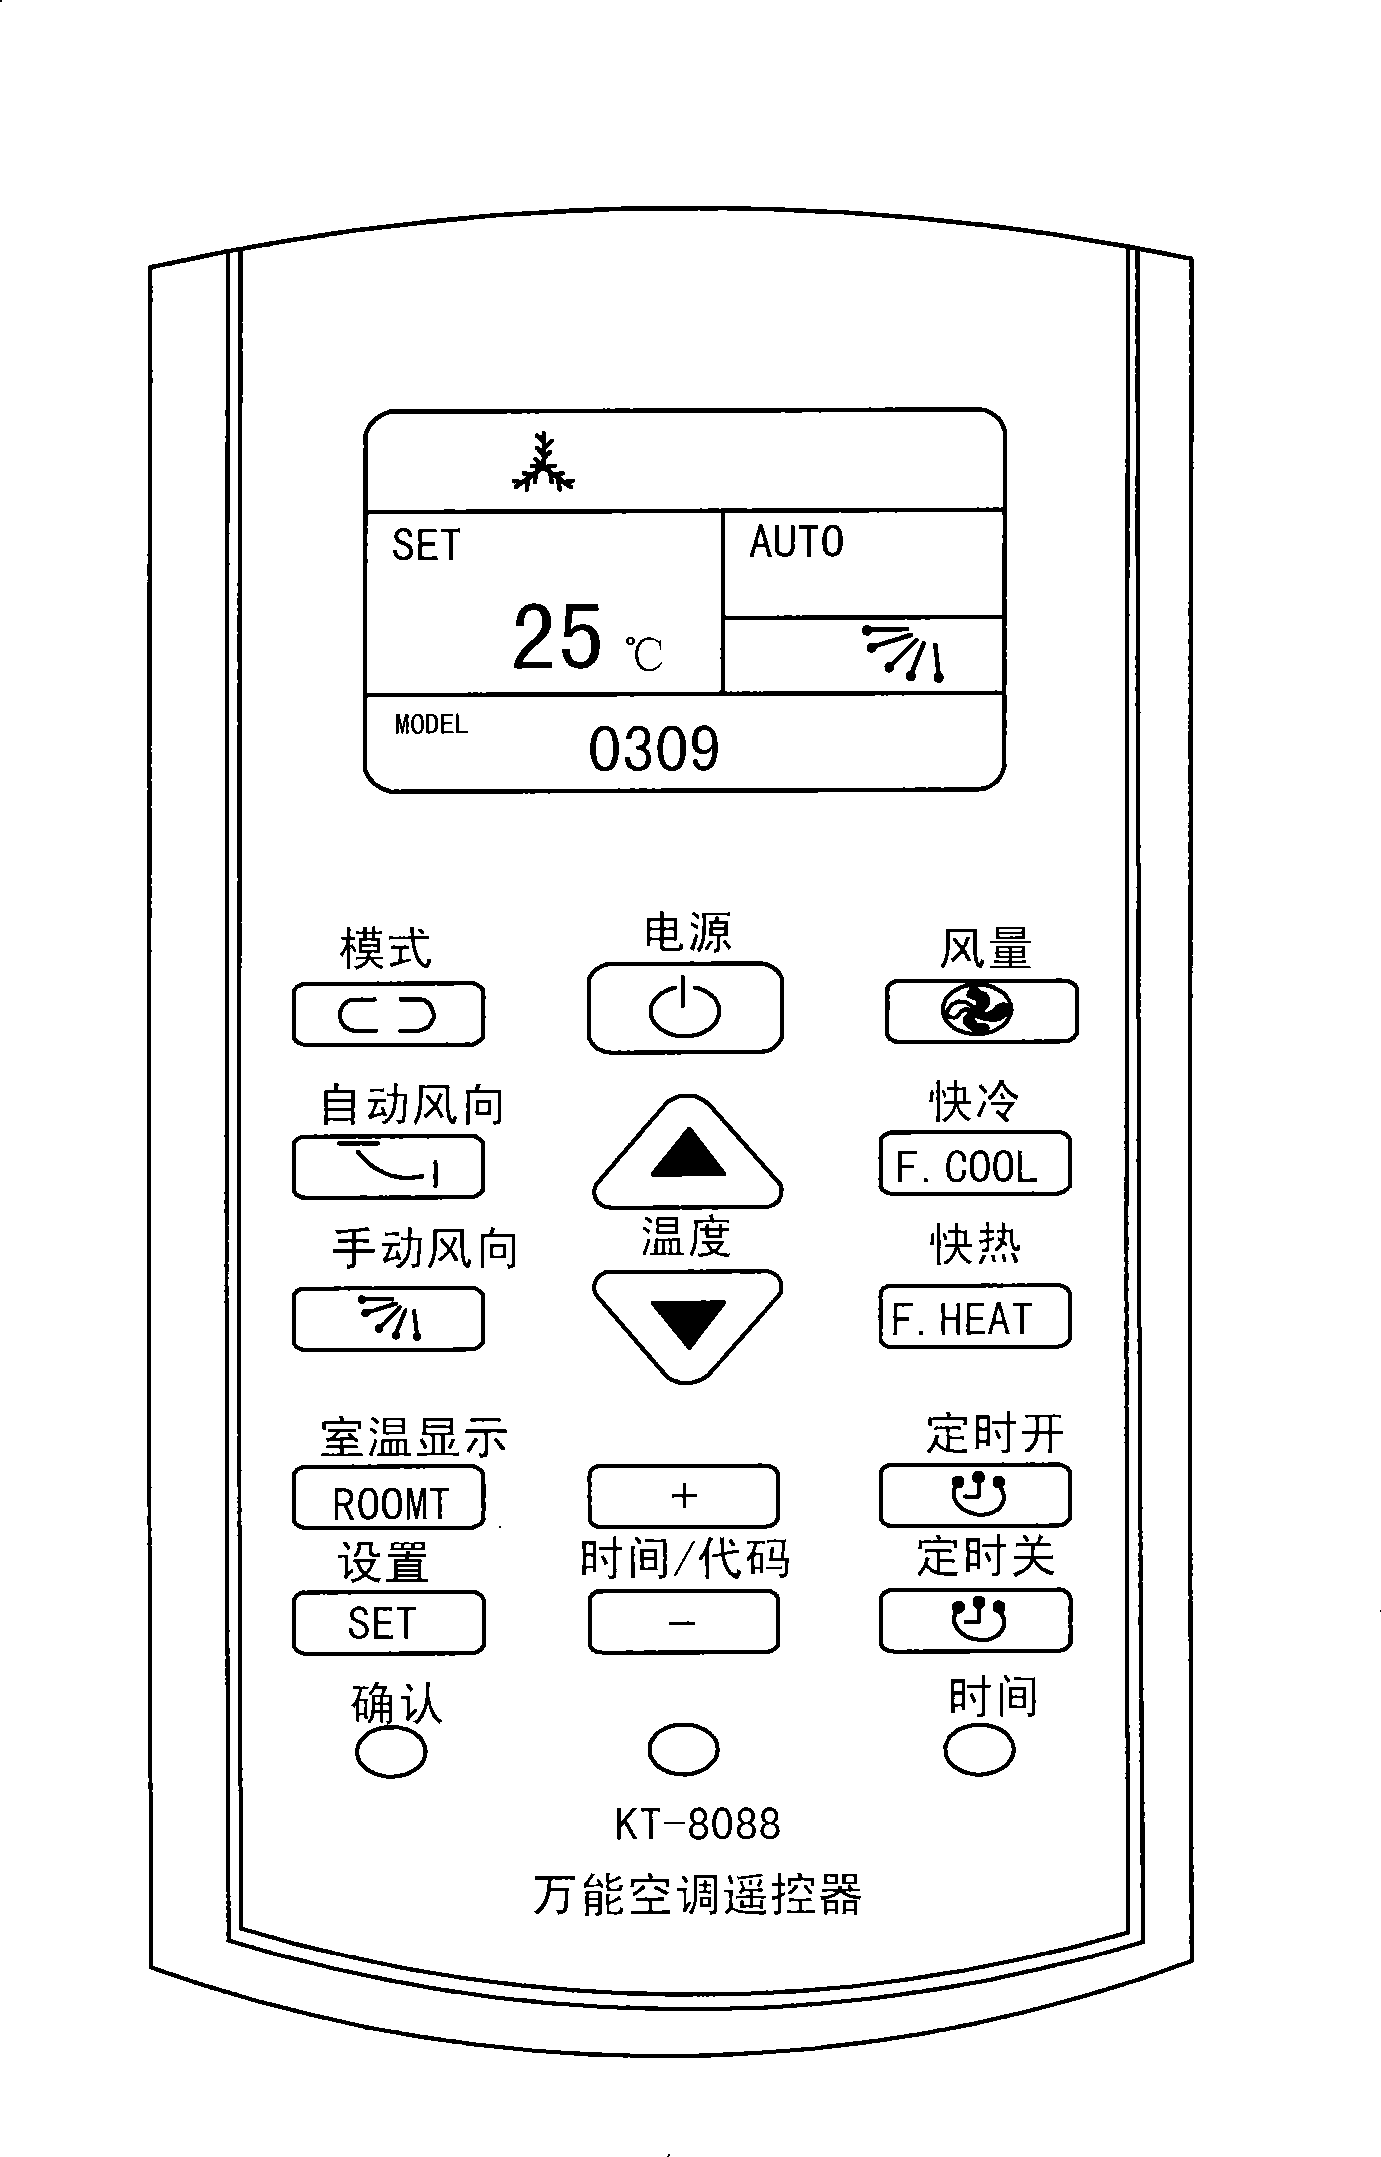 Encode setting method for universal air conditioner telecontroller